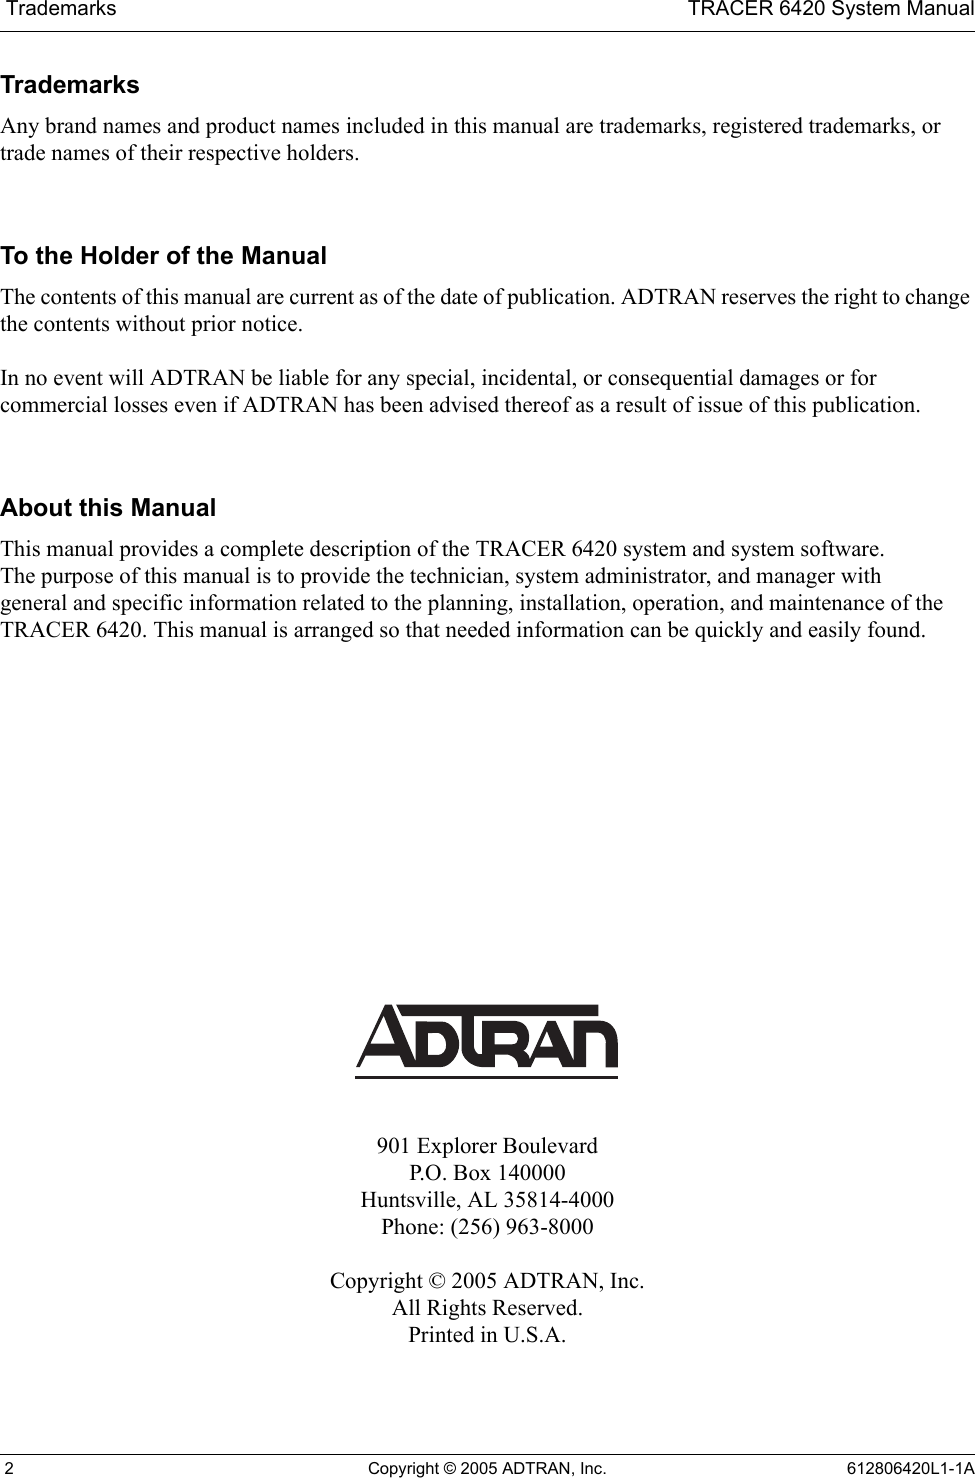  Trademarks TRACER 6420 System Manual 2 Copyright © 2005 ADTRAN, Inc. 612806420L1-1ATrademarksAny brand names and product names included in this manual are trademarks, registered trademarks, or trade names of their respective holders.To the Holder of the ManualThe contents of this manual are current as of the date of publication. ADTRAN reserves the right to change the contents without prior notice.In no event will ADTRAN be liable for any special, incidental, or consequential damages or for commercial losses even if ADTRAN has been advised thereof as a result of issue of this publication.About this ManualThis manual provides a complete description of the TRACER 6420 system and system software. The purpose of this manual is to provide the technician, system administrator, and manager with general and specific information related to the planning, installation, operation, and maintenance of the TRACER 6420. This manual is arranged so that needed information can be quickly and easily found. 901 Explorer BoulevardP.O. Box 140000Huntsville, AL 35814-4000Phone: (256) 963-8000Copyright © 2005 ADTRAN, Inc.All Rights Reserved.Printed in U.S.A.